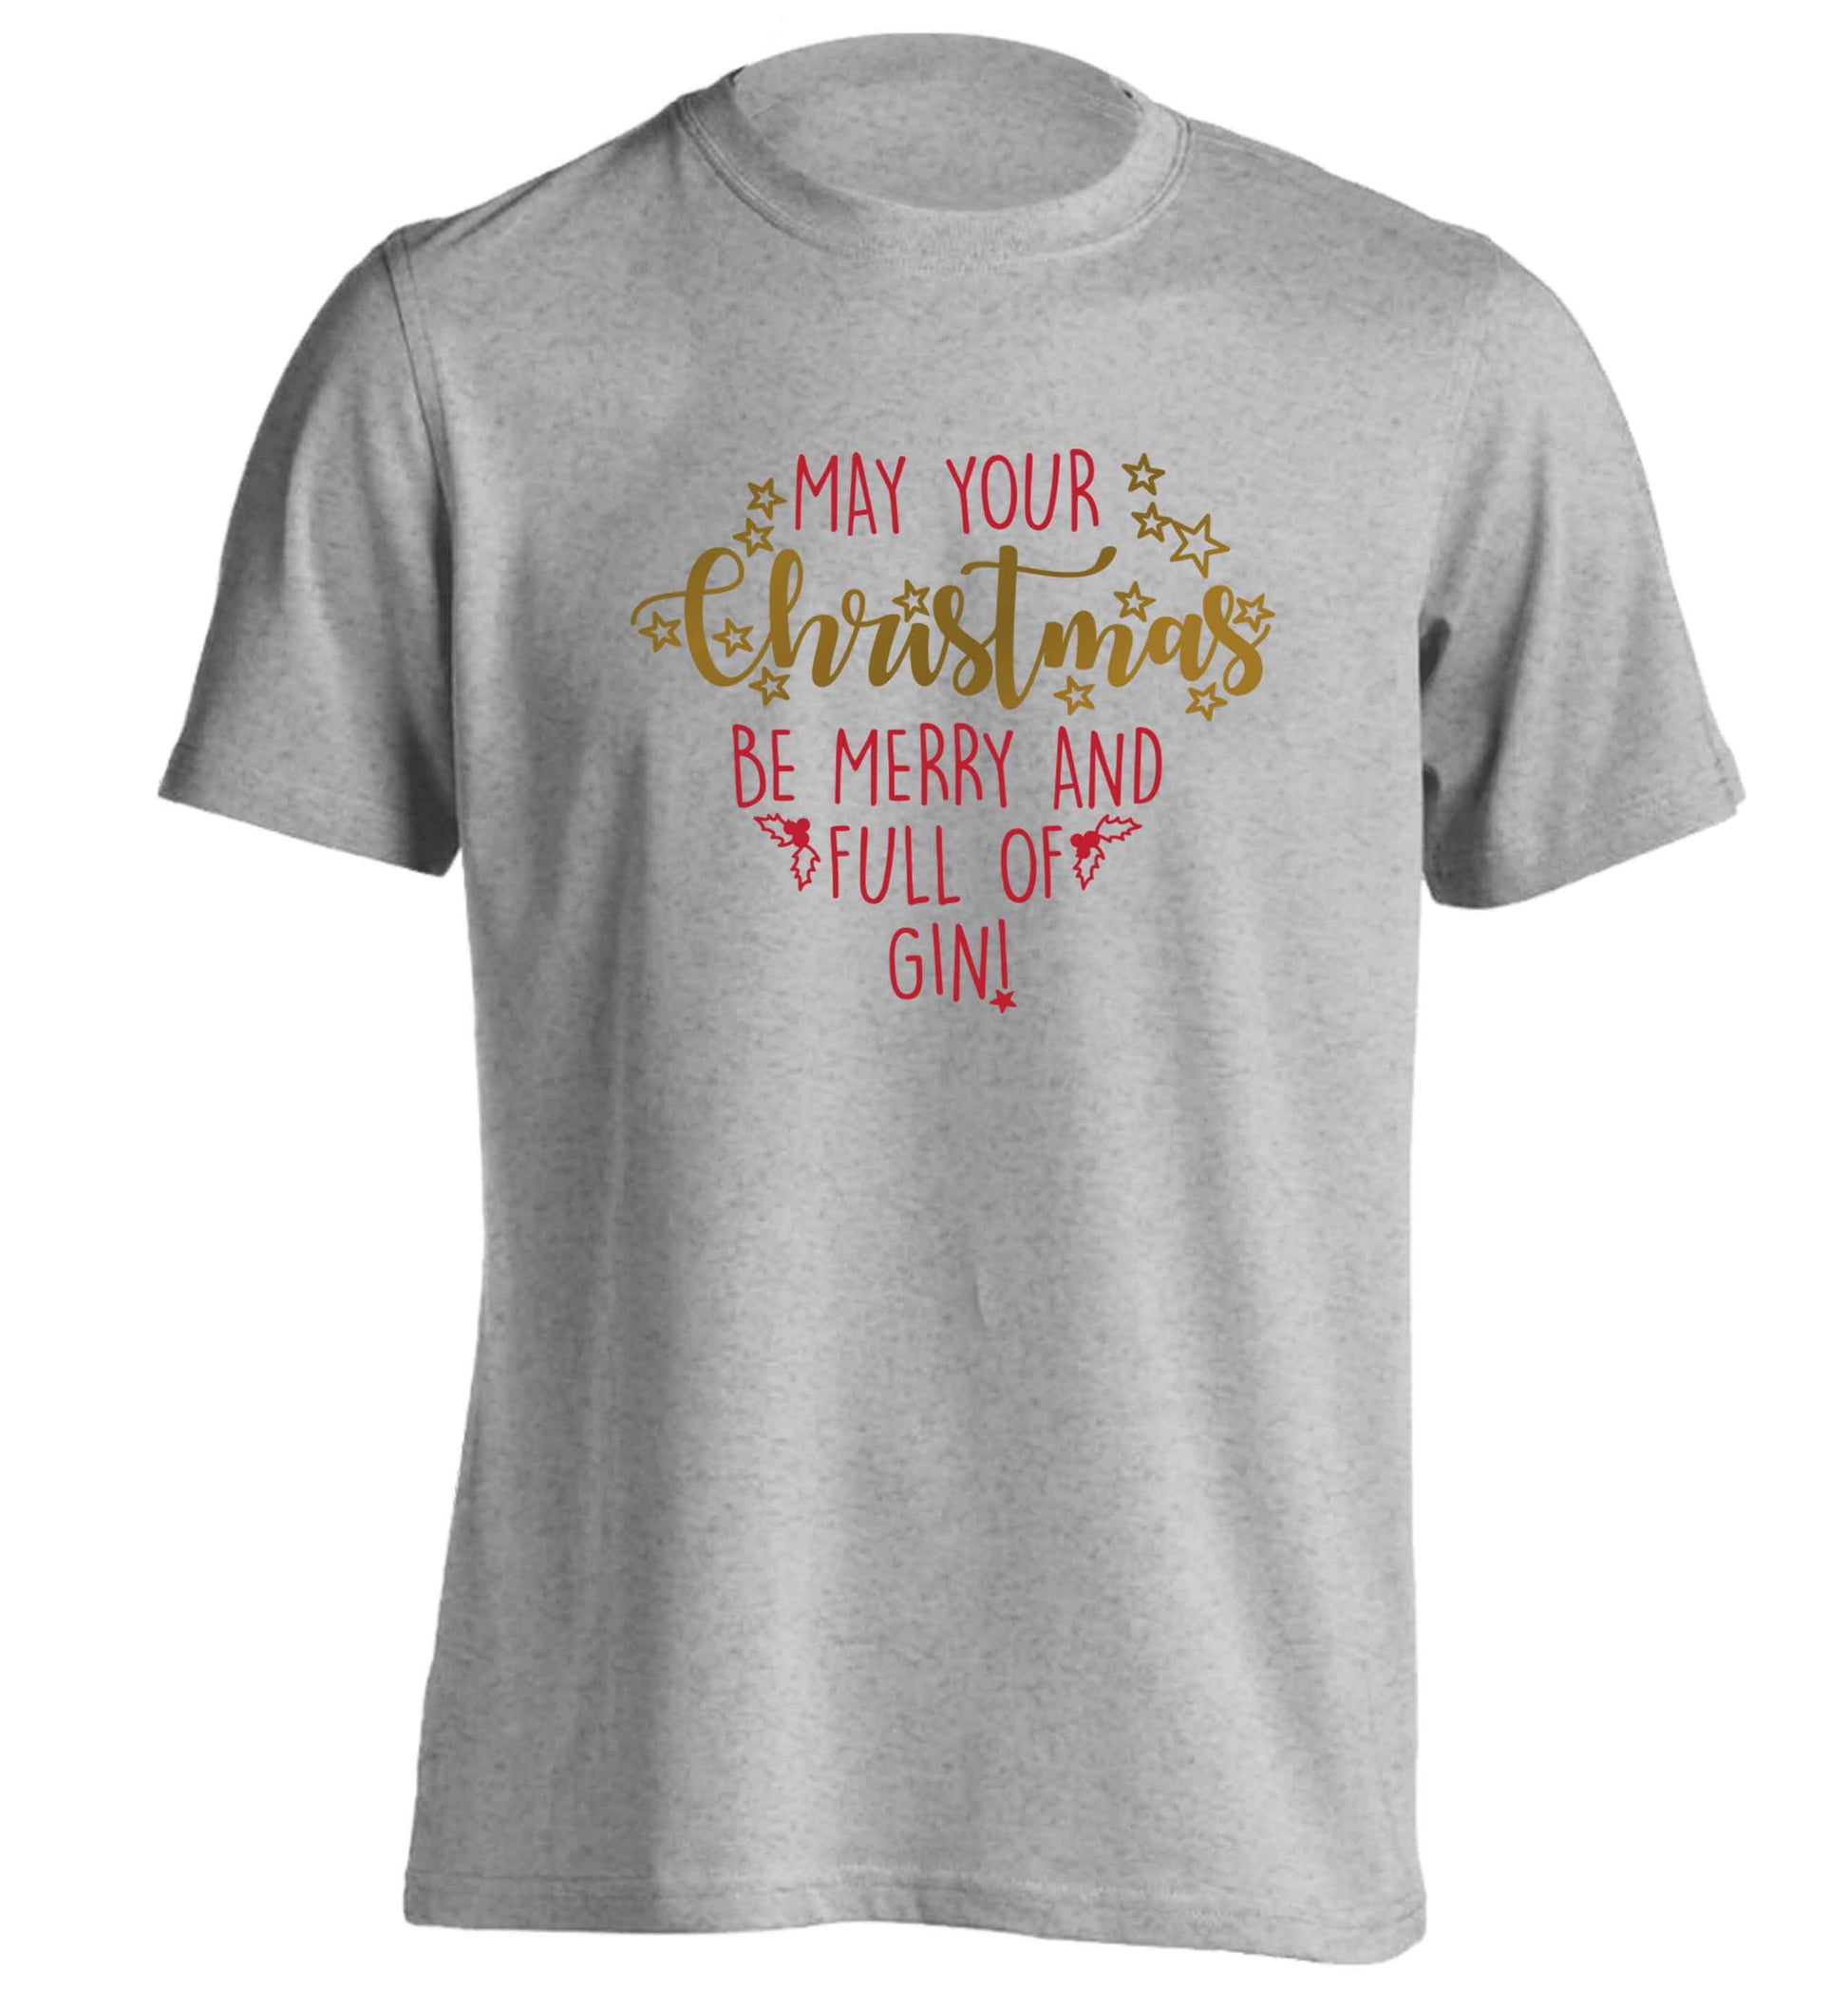 May your Christmas be merry and full of gin adults unisex grey Tshirt 2XL